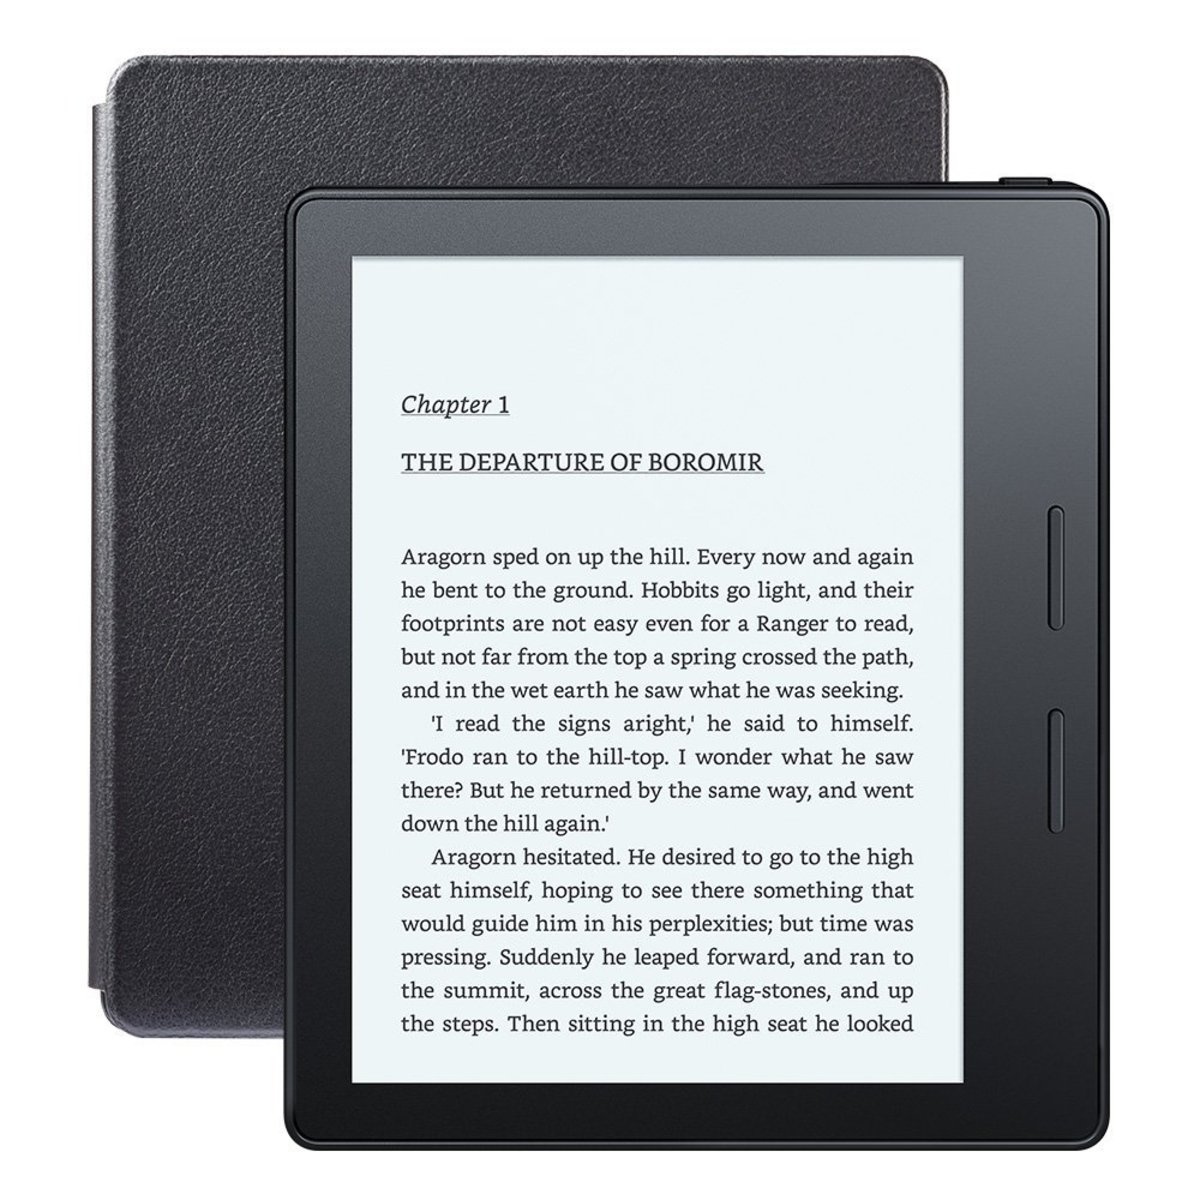 Amazon's newest Kindle sets the bar once again for e-readers - Acquire